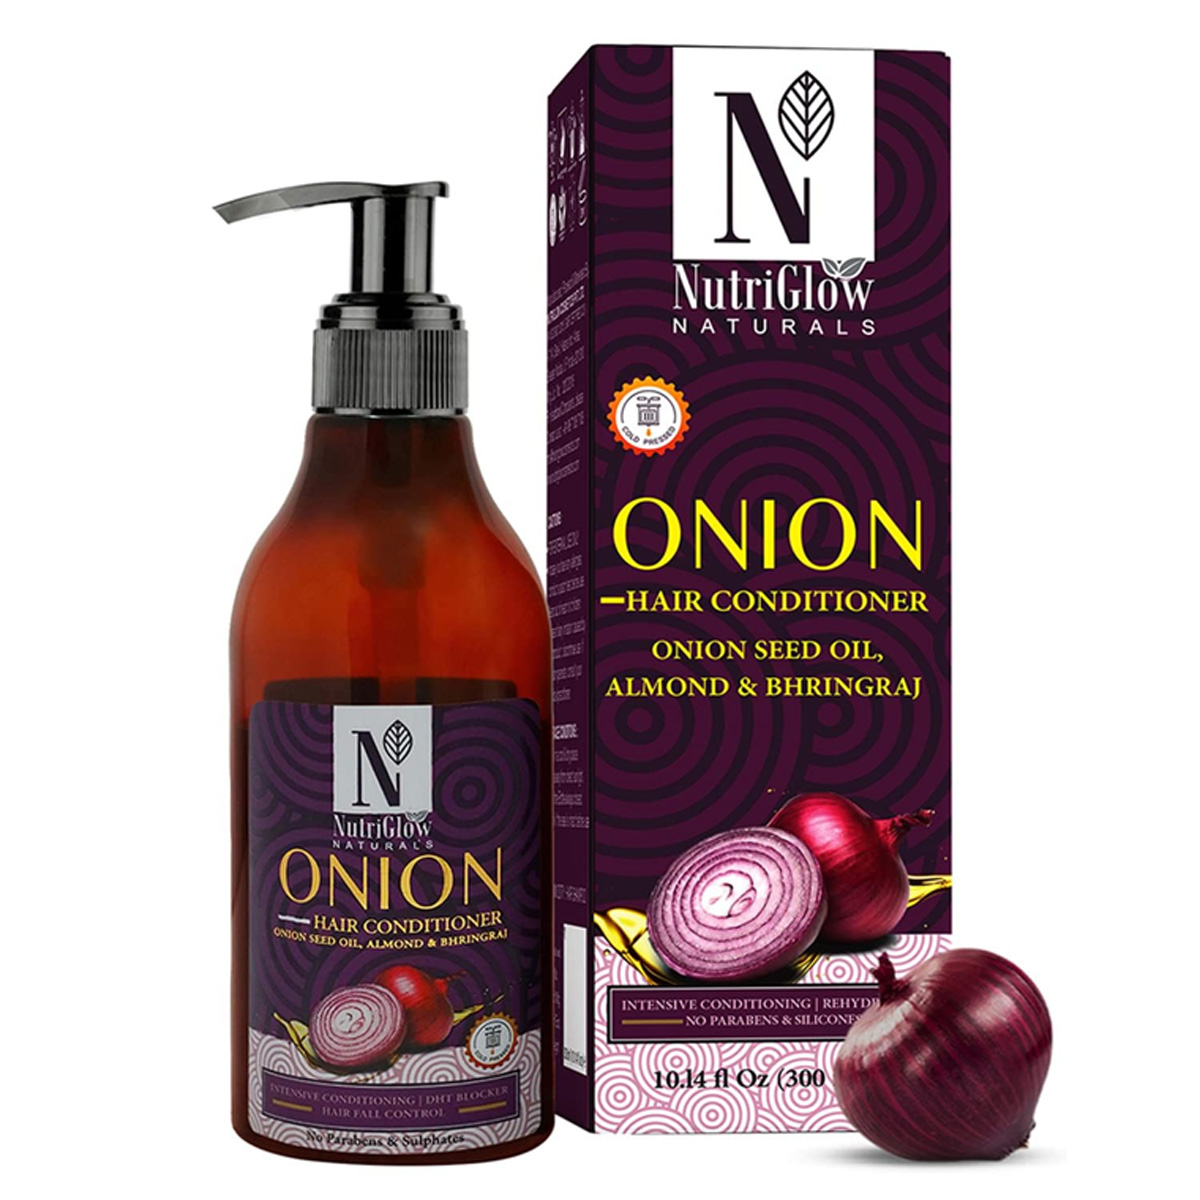 Nutriglow Natural's Onion Hair Conditioner With Almond & Bhringraj, 300ml